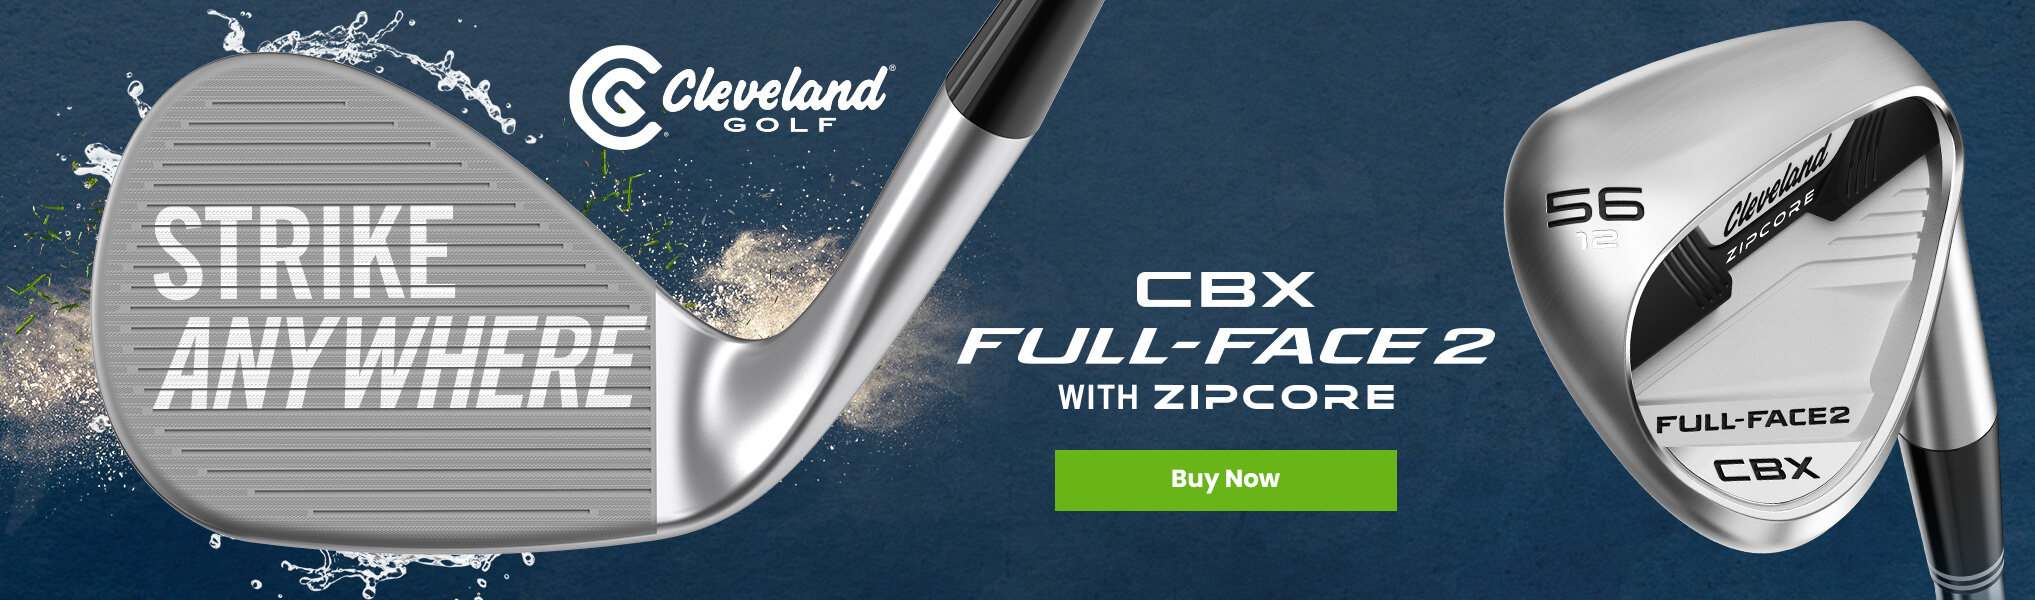 Cleveland CBX Full-Face 2 Now Available